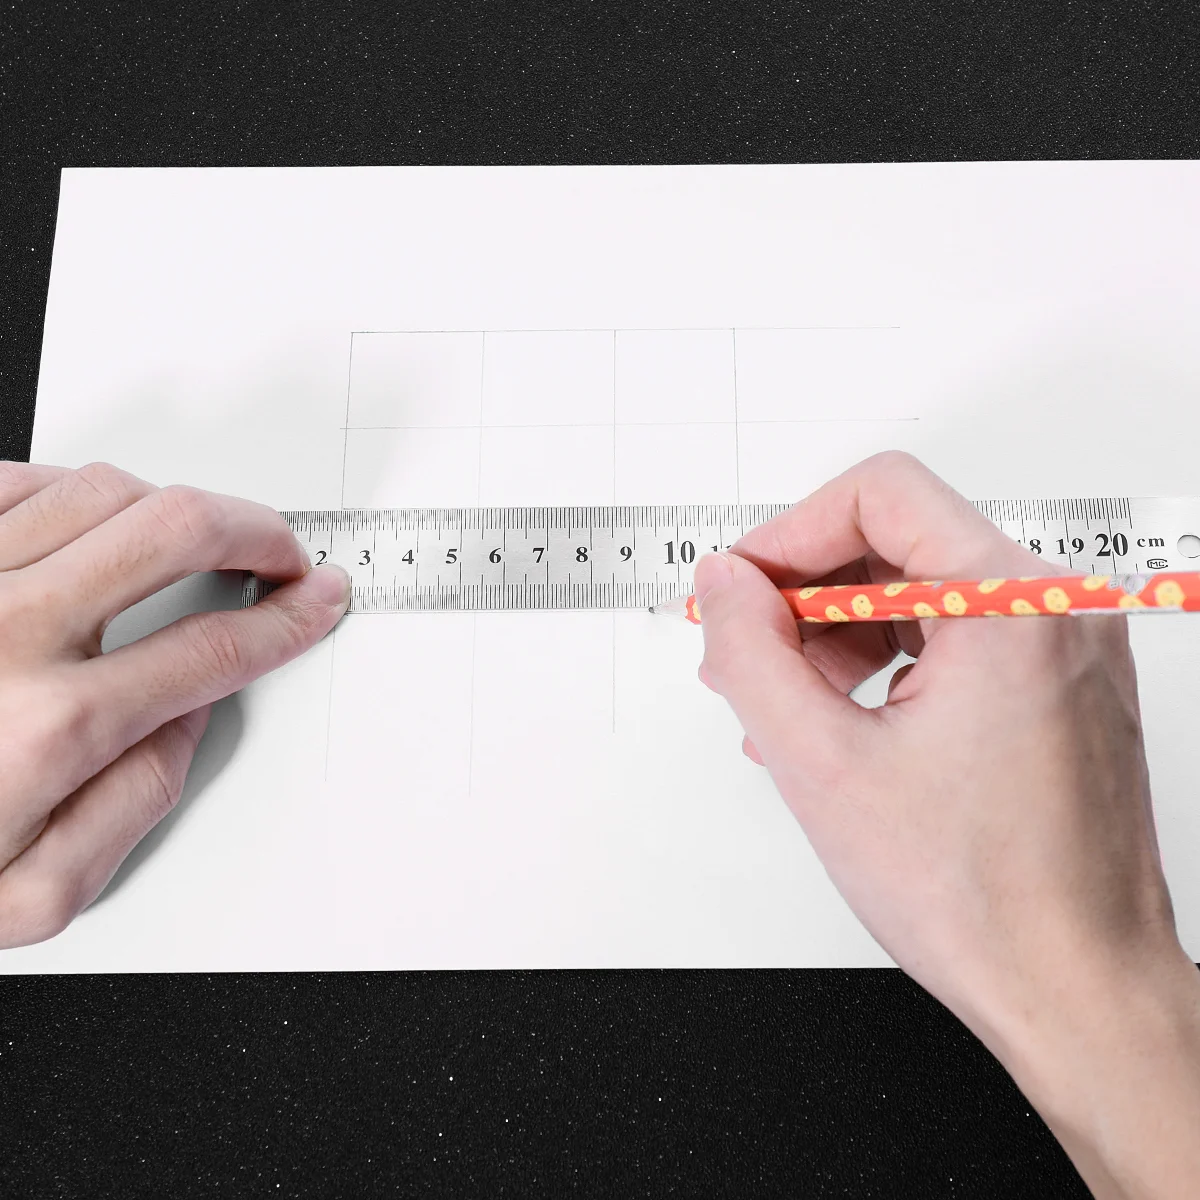 TOYMYTOY 3Pcs Stainless Steel Ruler Metal Ruler for Engineering School Office Drawing 20cm/30cm/40cm